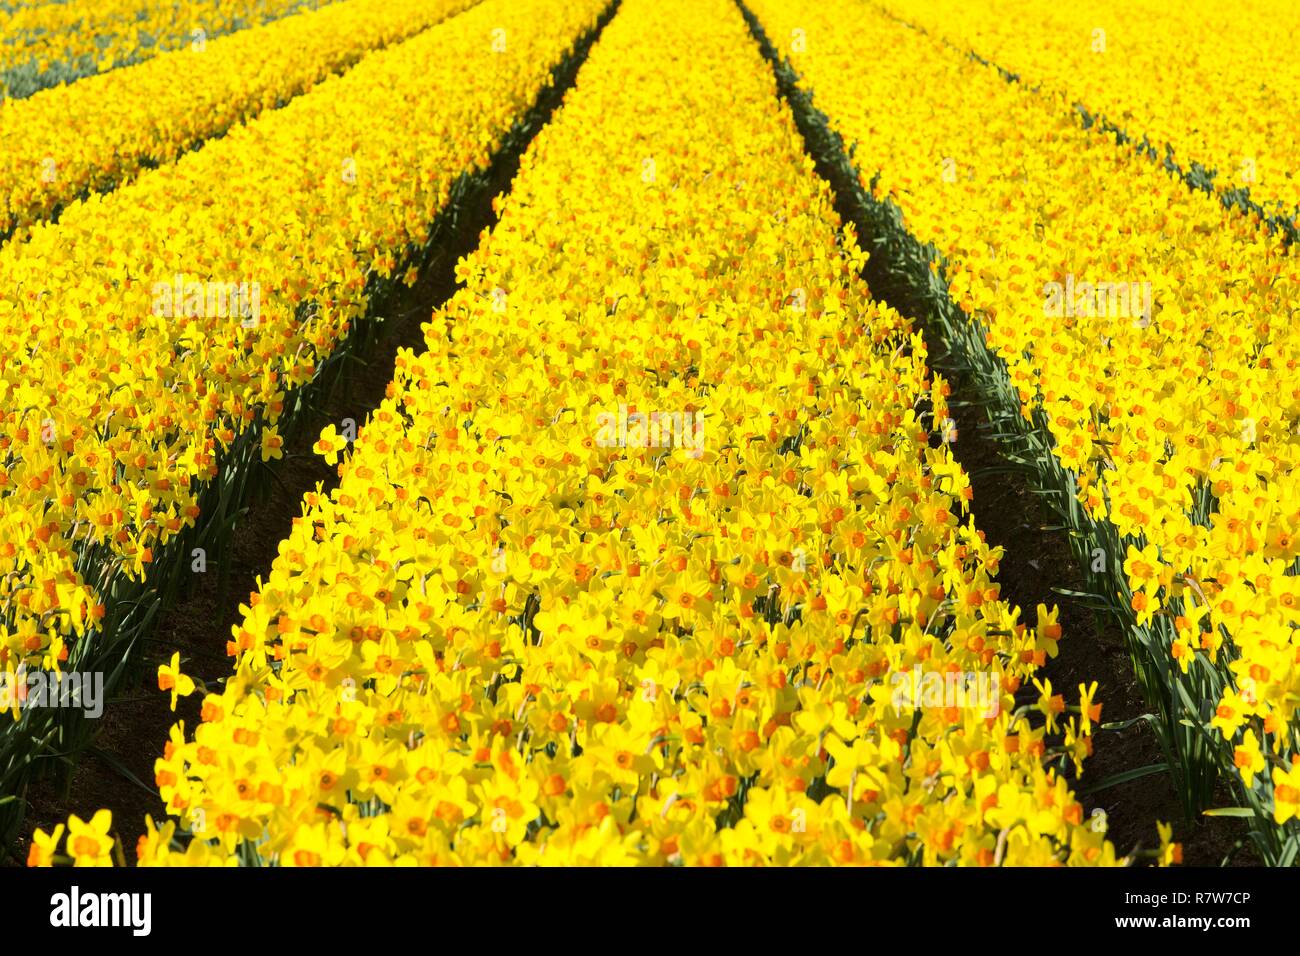 Netherlands, Southern Holland province, Noordwijkerhouth, narcissus fields Stock Photo